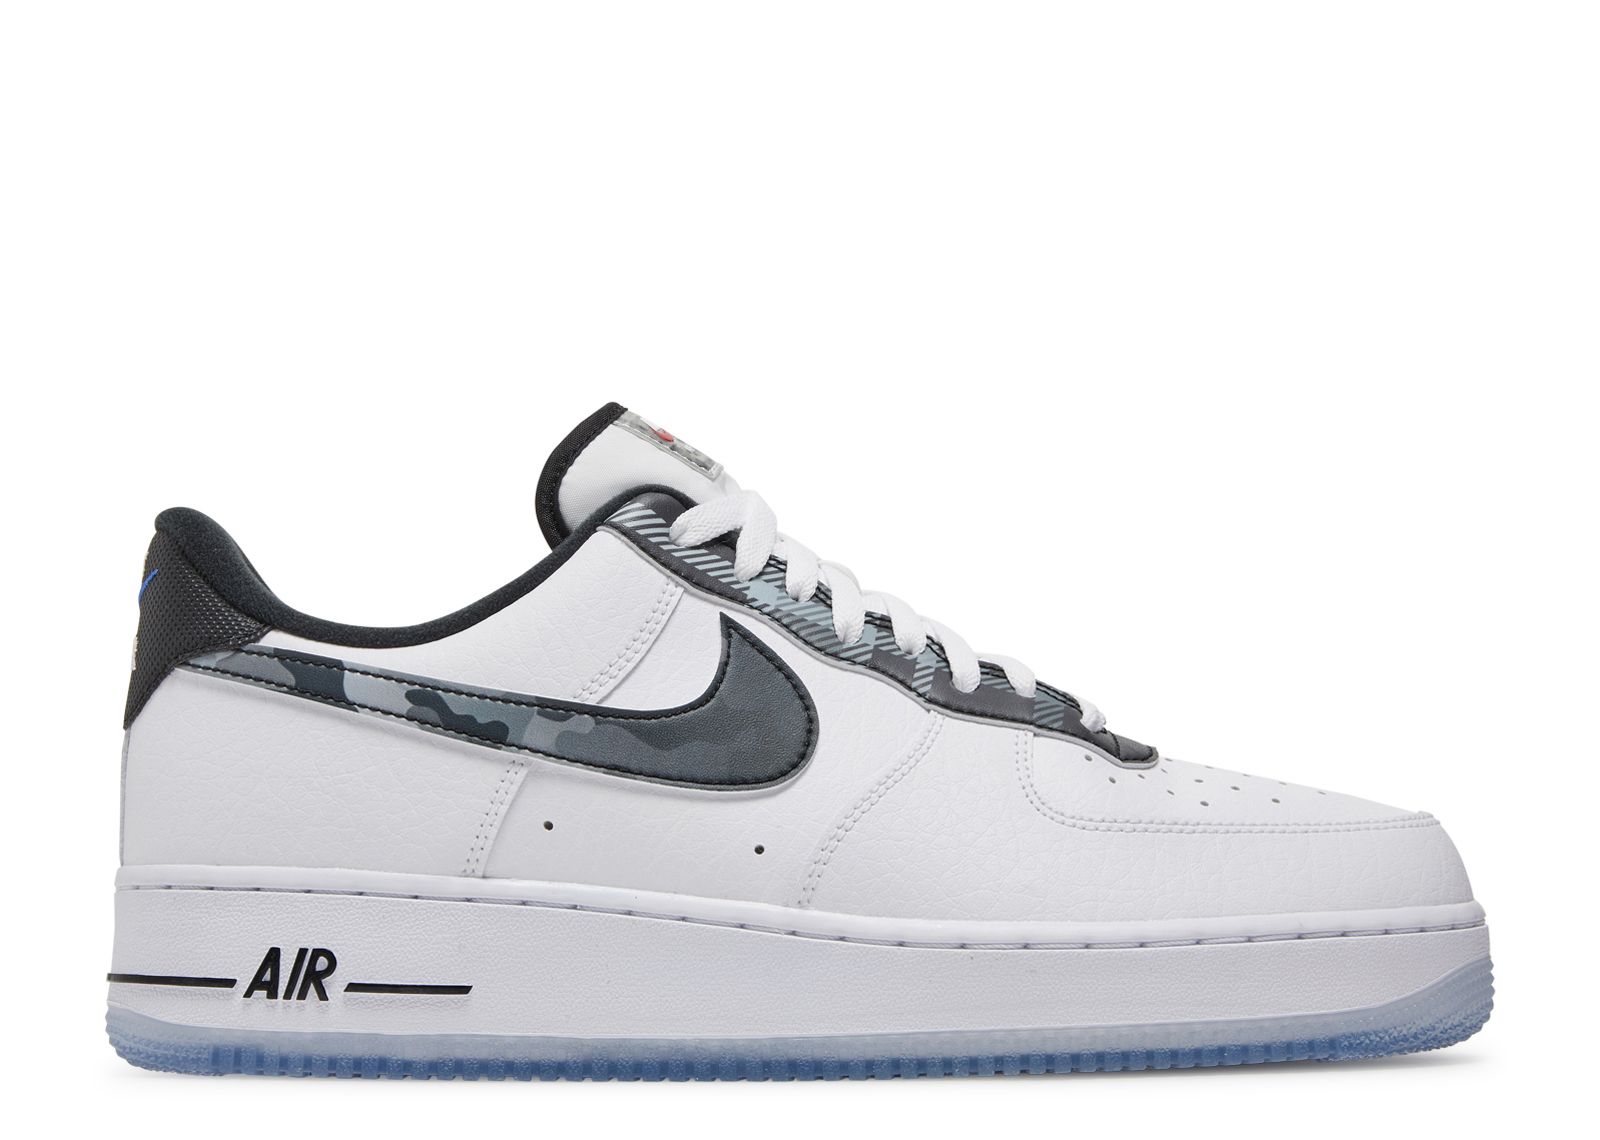 Nike Air Force 1 '07 LV8 Remix Sneakers in Gray